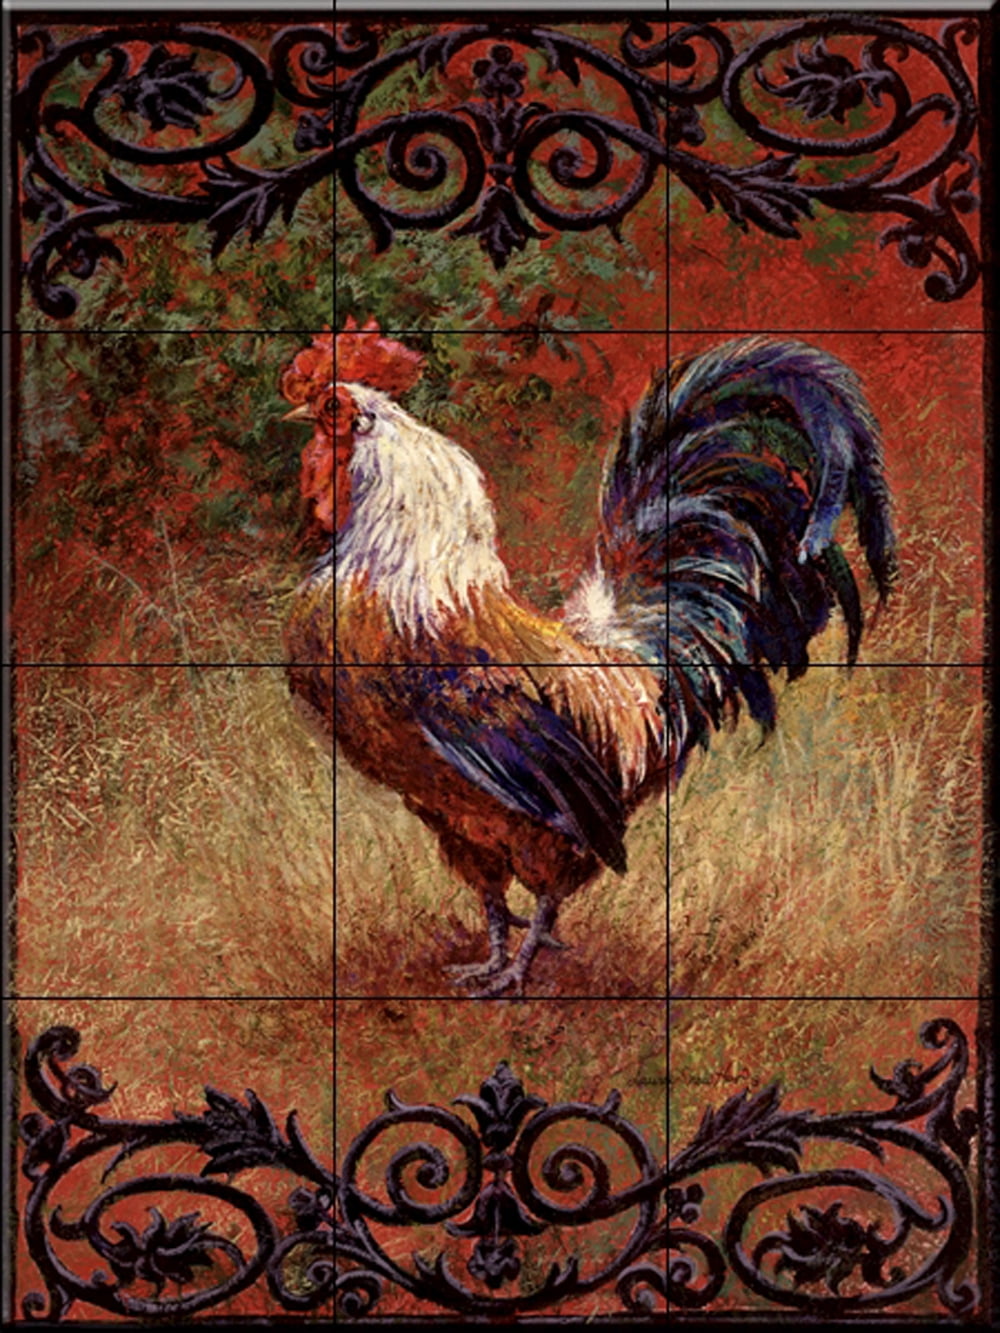 Ceramic Tile Mural - Iron Gate Rooster I - by Laurie Snow Hein ...